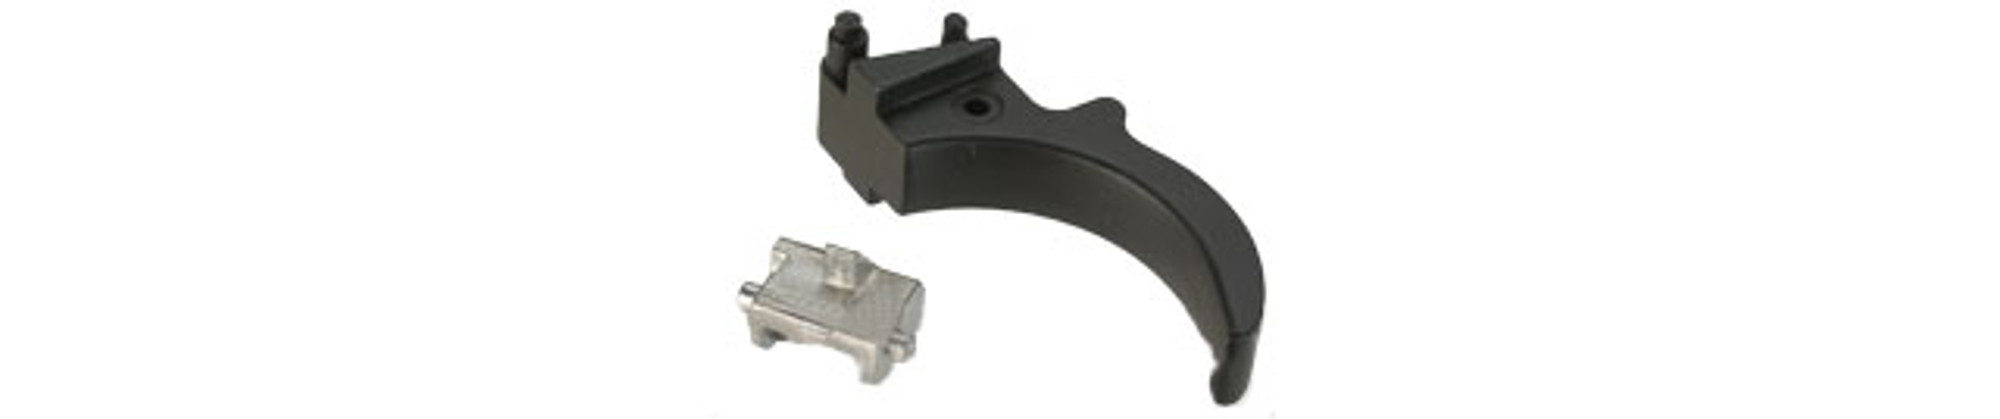 JG Reinforced Trigger Set for G36 / XM8 Series Airsoft AEGs